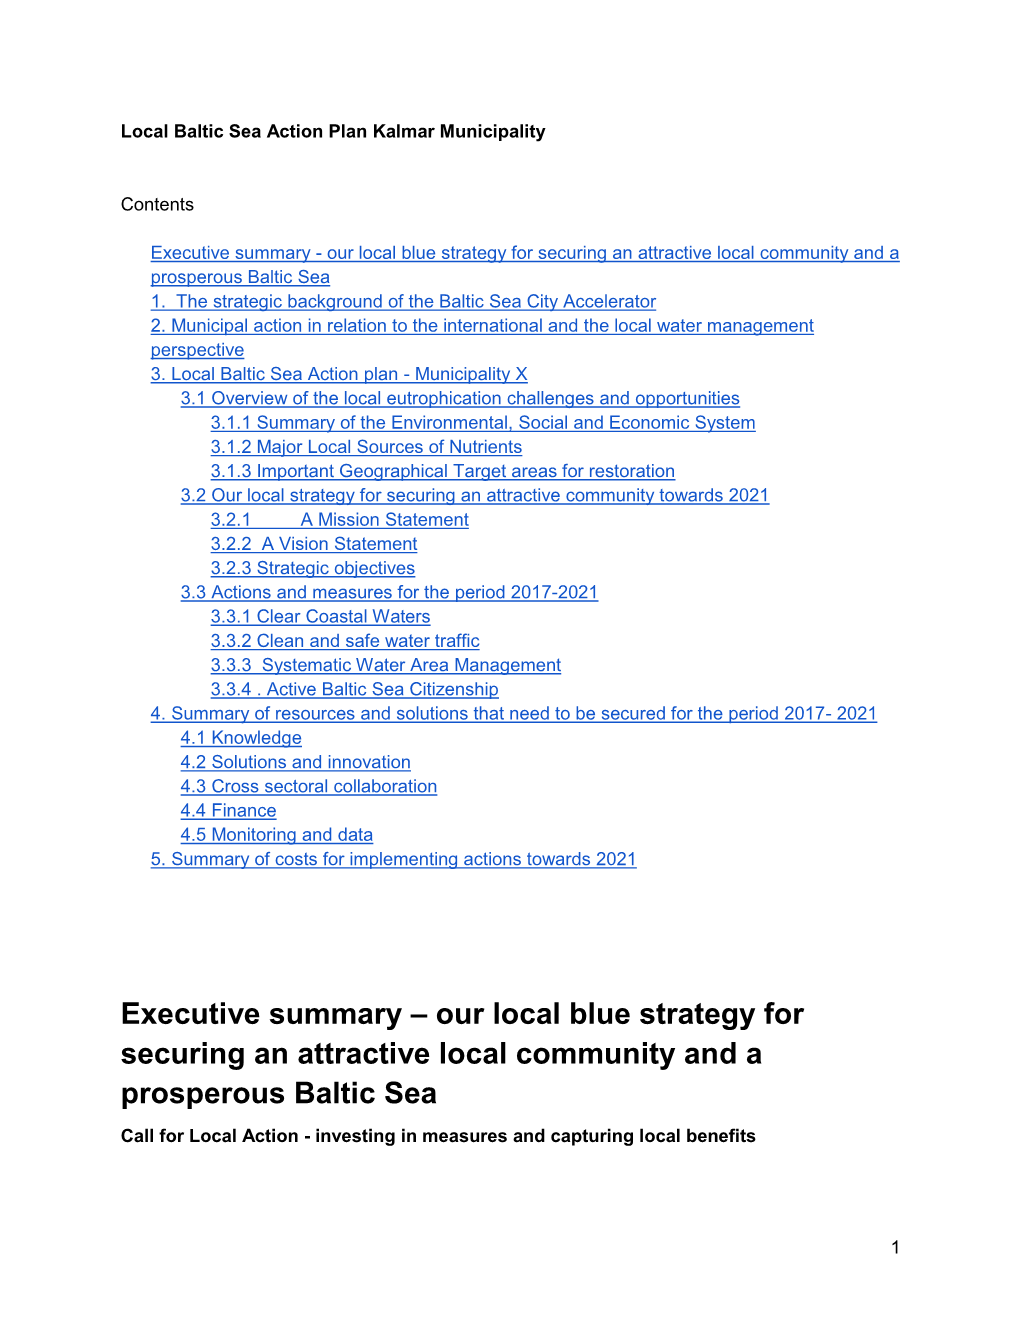 Executive Summary – Our Local Blue Strategy for Securing an Attractive